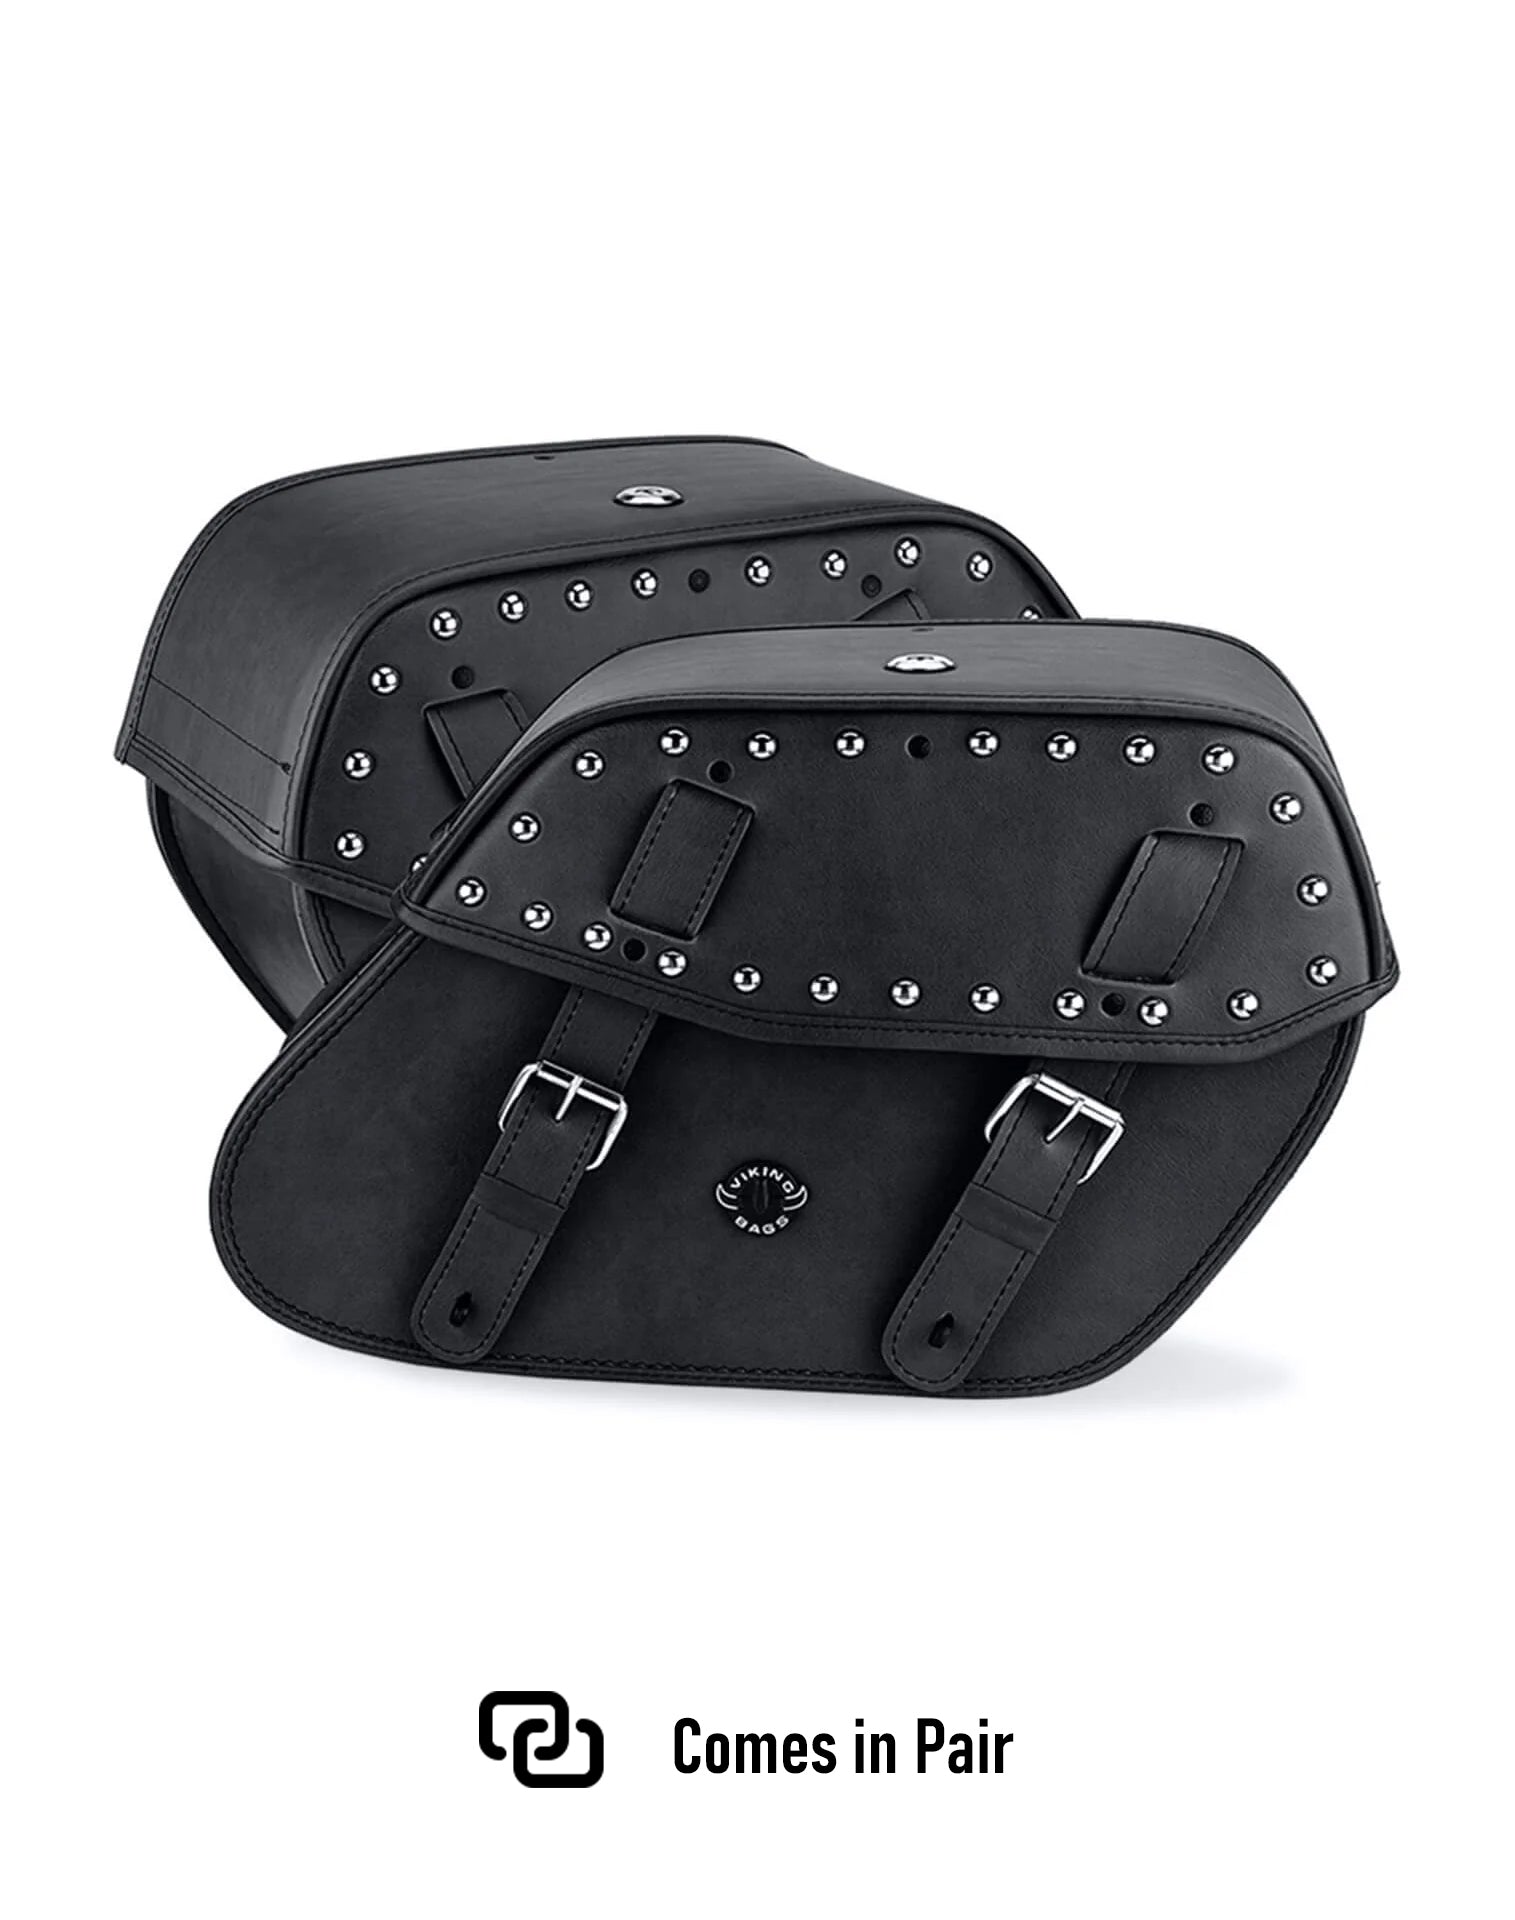 Viking Odin Large Studded Leather Motorcycle Saddlebags For Harley Softail Low Rider Fxlr Weather Resistant Bags Comes in Pair